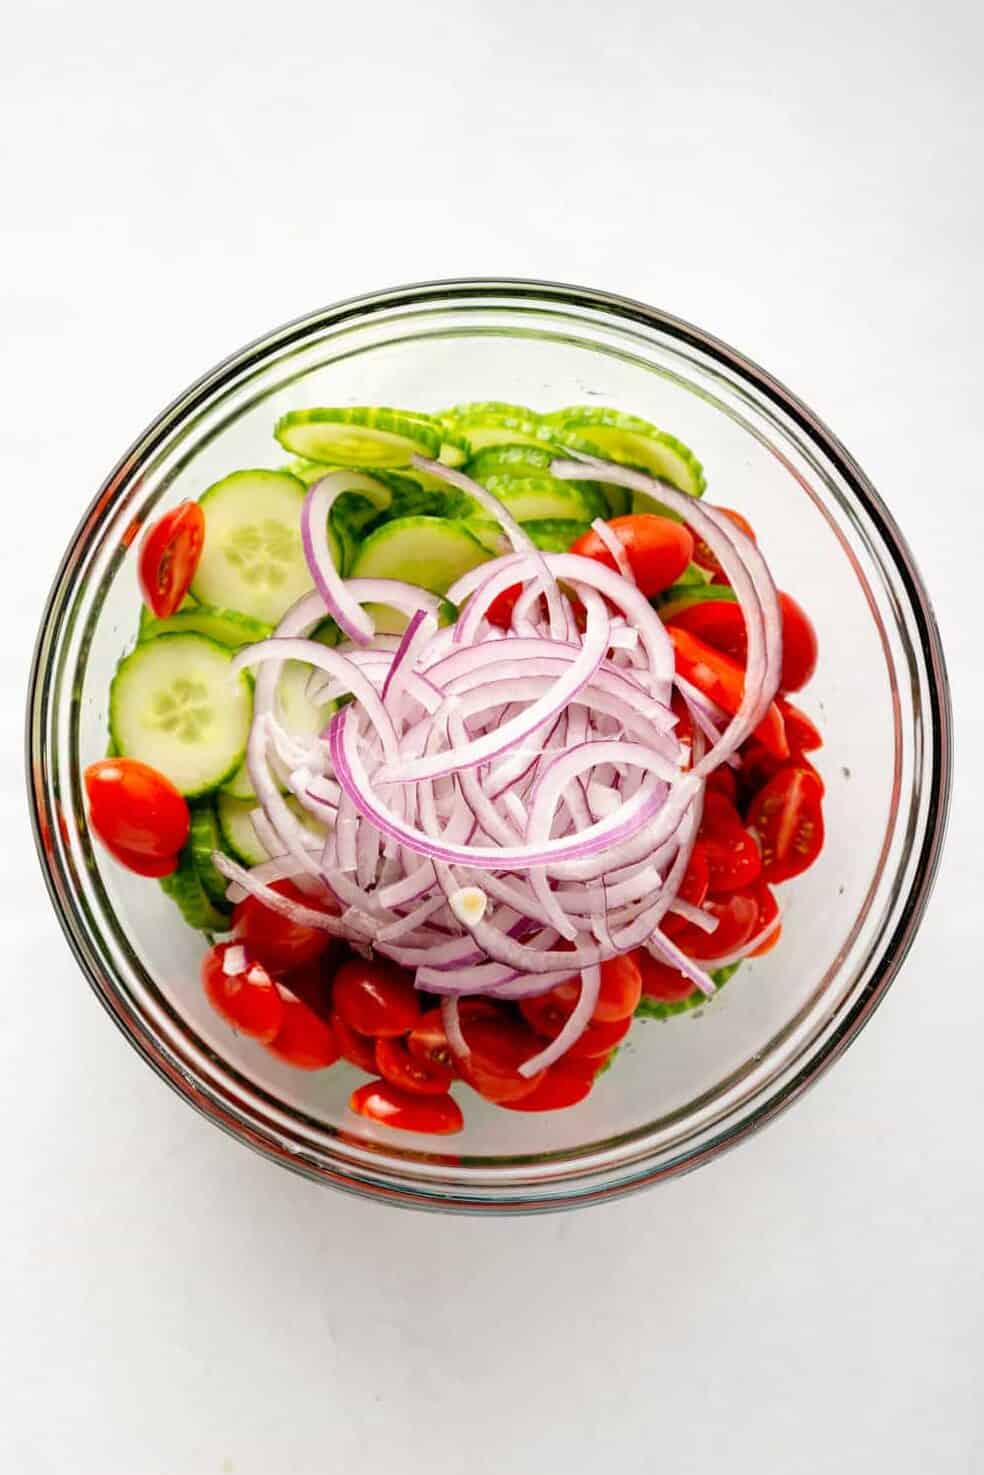 sliced persian cucumbers, cherry tomatoes and red onion in a large glass bowl